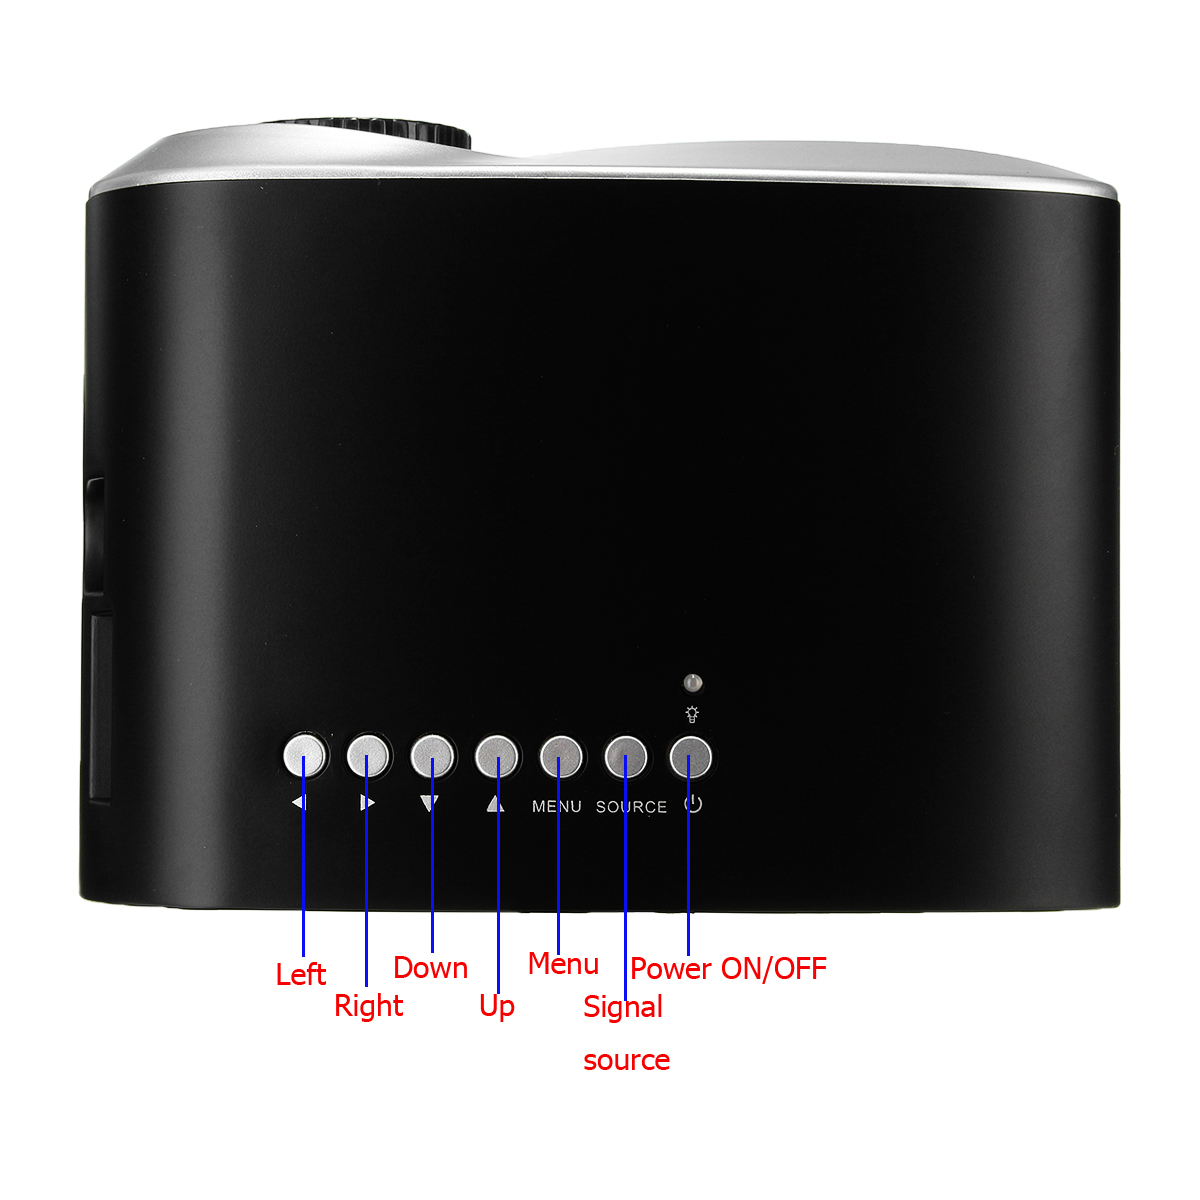 Find 802 Mini Portable 1080P 3D HD LED Projector Multimedia Home Theater USB VGA HDMI TV for Sale on Gipsybee.com with cryptocurrencies